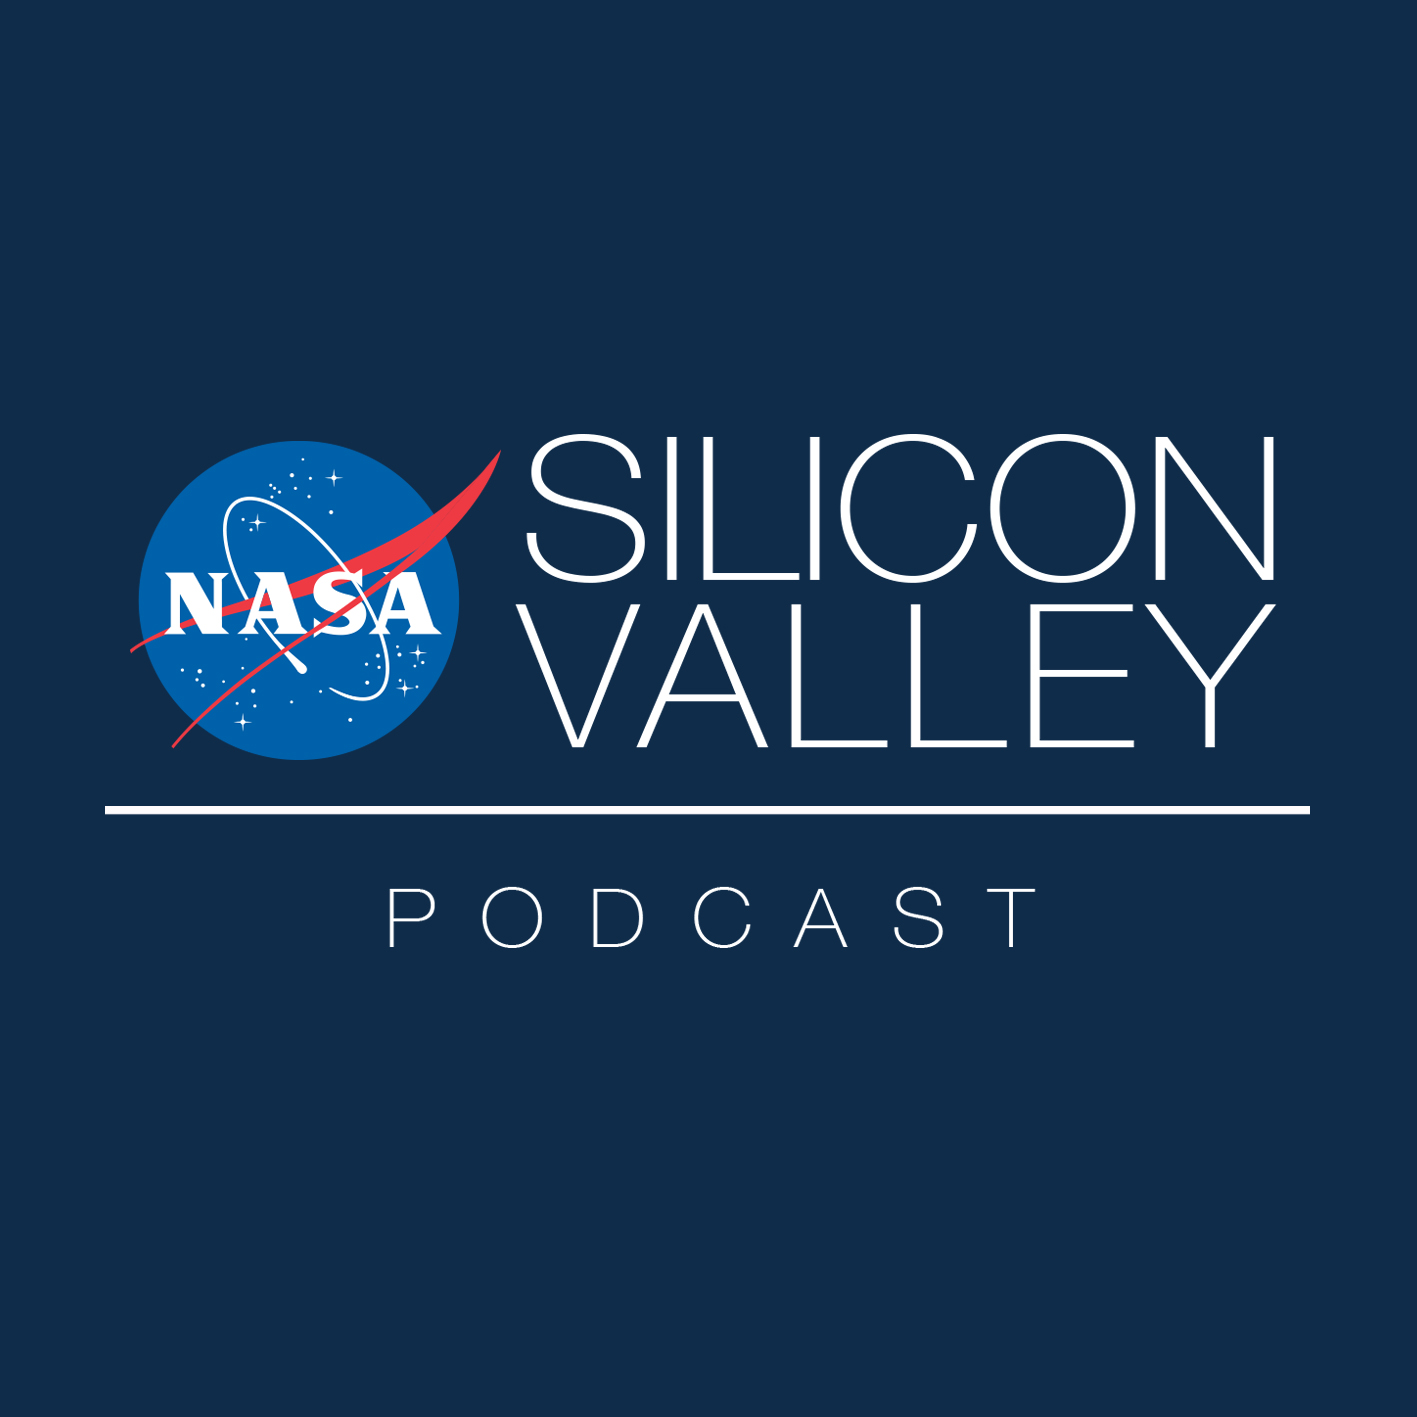 Rodents Help NASA Take the Next Step to Mars: Podcast